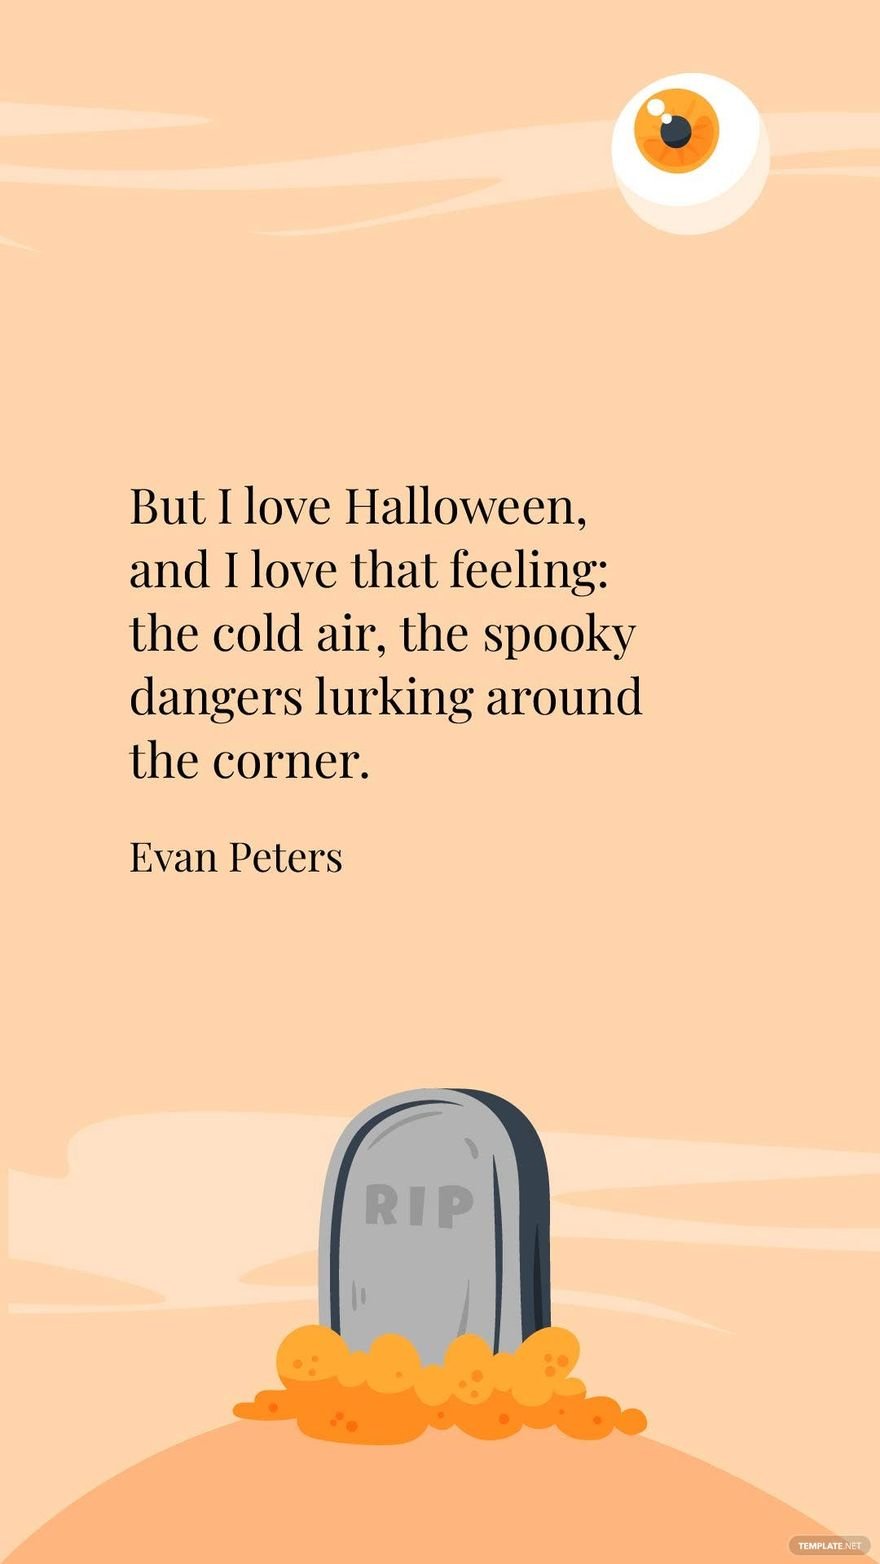 Free Evan Peters- But I love Halloween, and I love that feeling: the cold air, the spooky dangers lurking around the corner. 